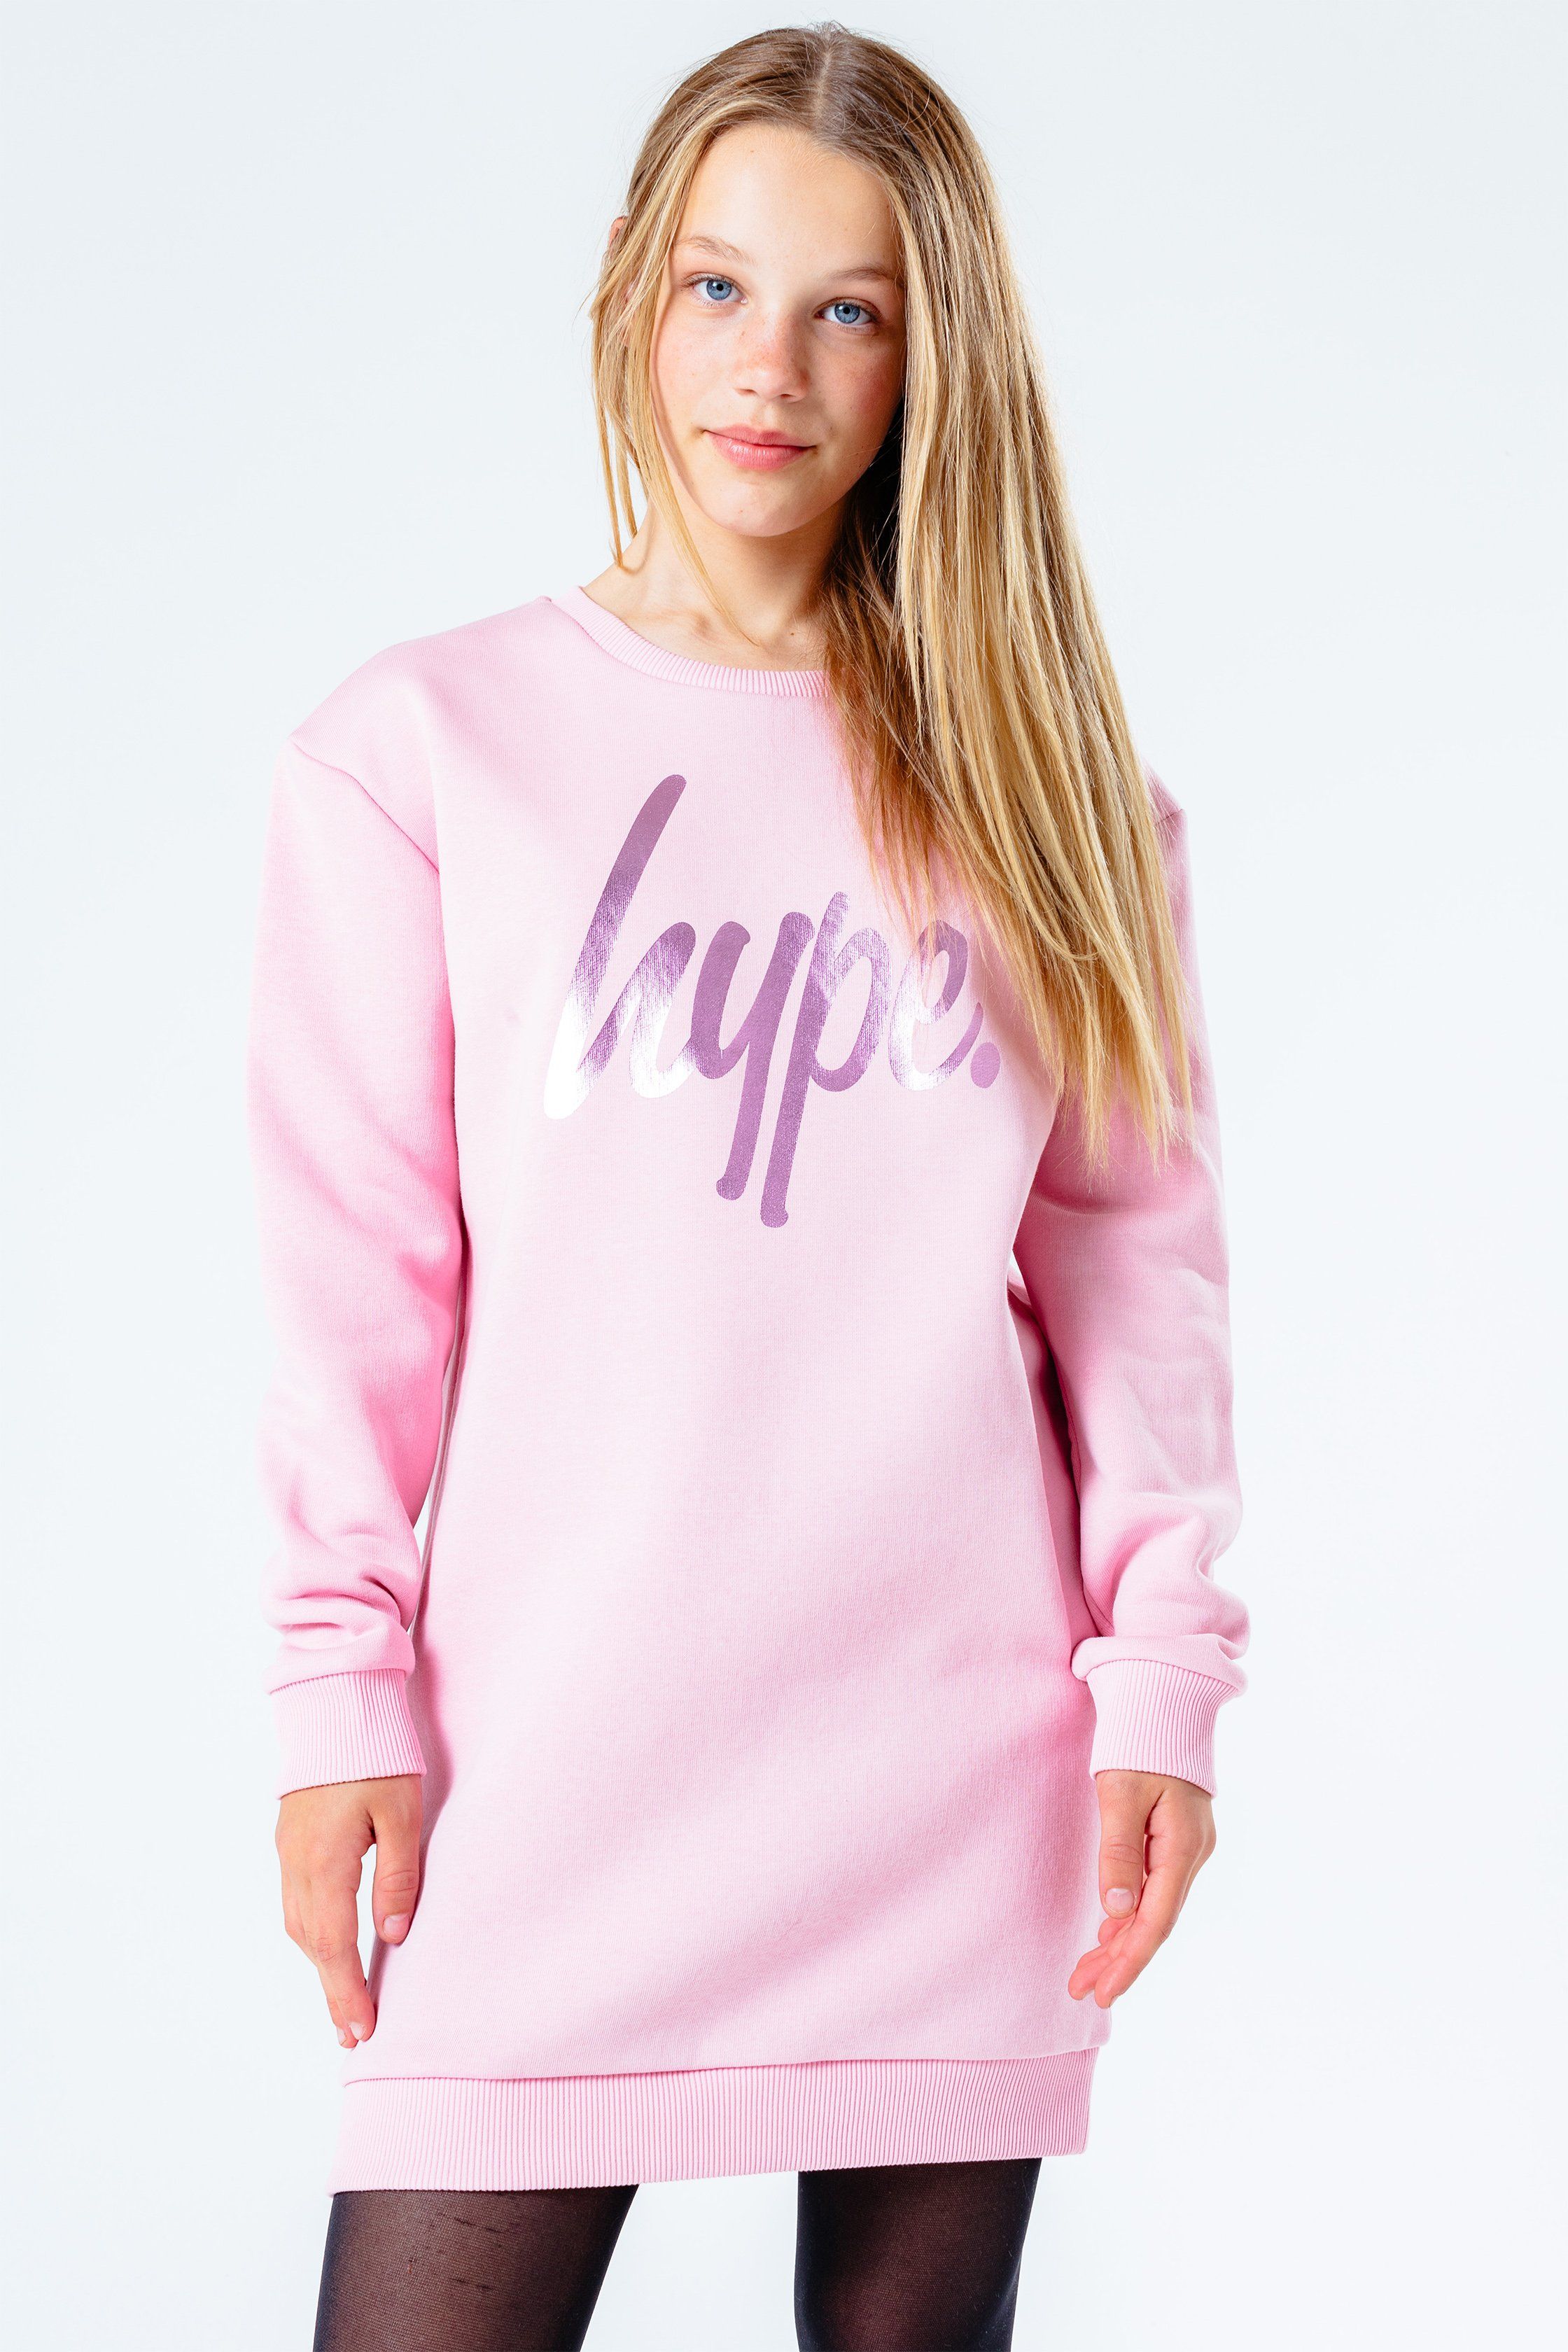 The cutest dress you'll need this season, and every season after that. The Hype. foil print girls sweat dress features our iconic HYPE. script logo in a holographic transfer. The fabric boasts a pink soft-touch base for supreme comfort. With a crew neckline and long-sleeves with fitted cuffs. Wear with cute sandals to complete the look. Machine wash at 30 degrees.